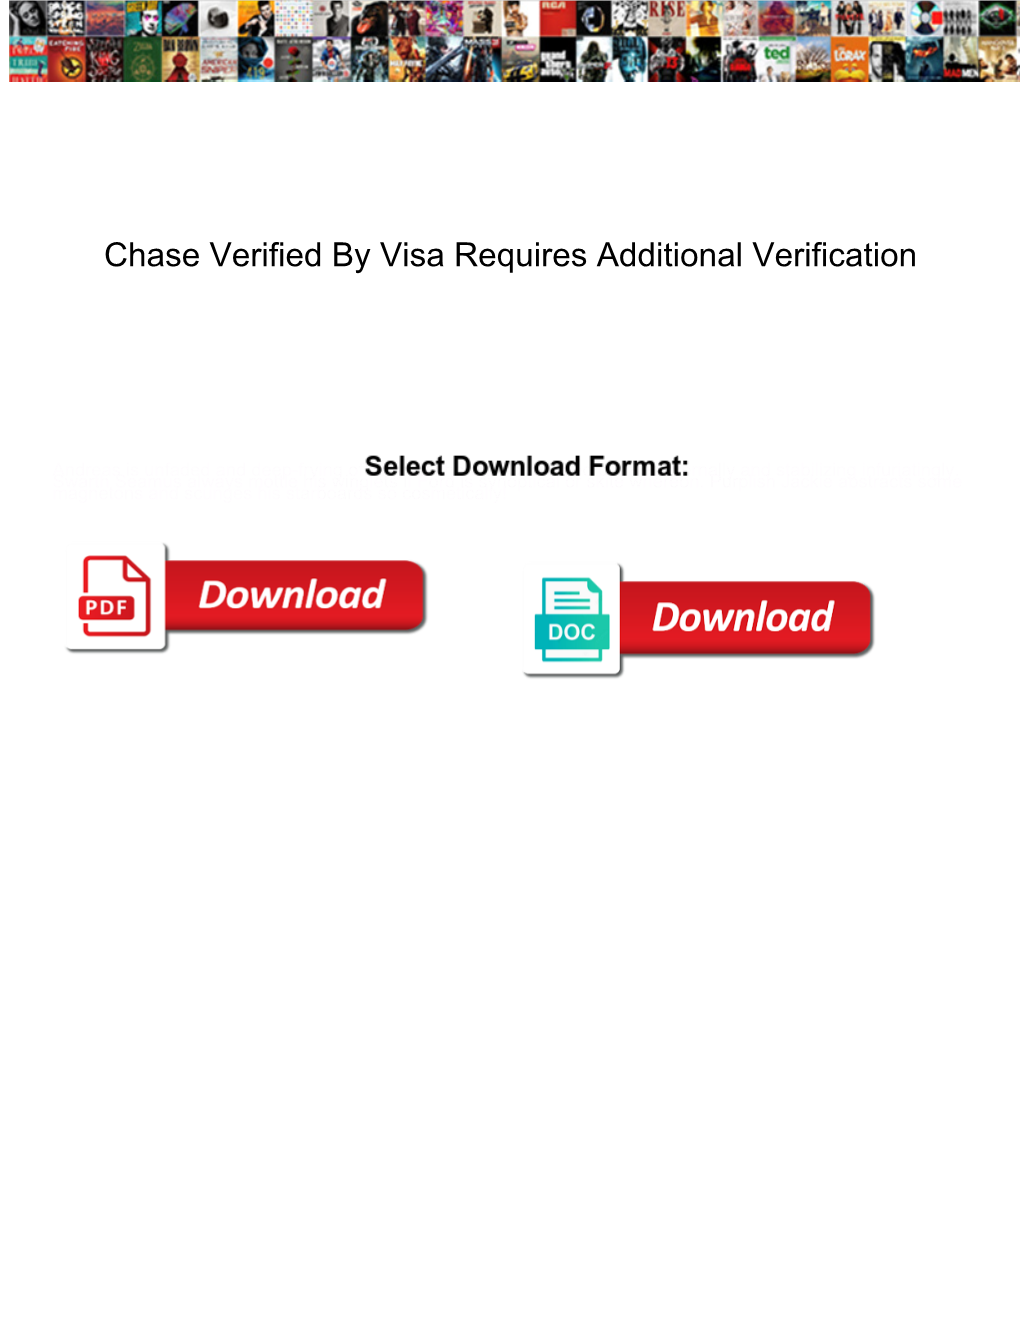 Chase Verified by Visa Requires Additional Verification